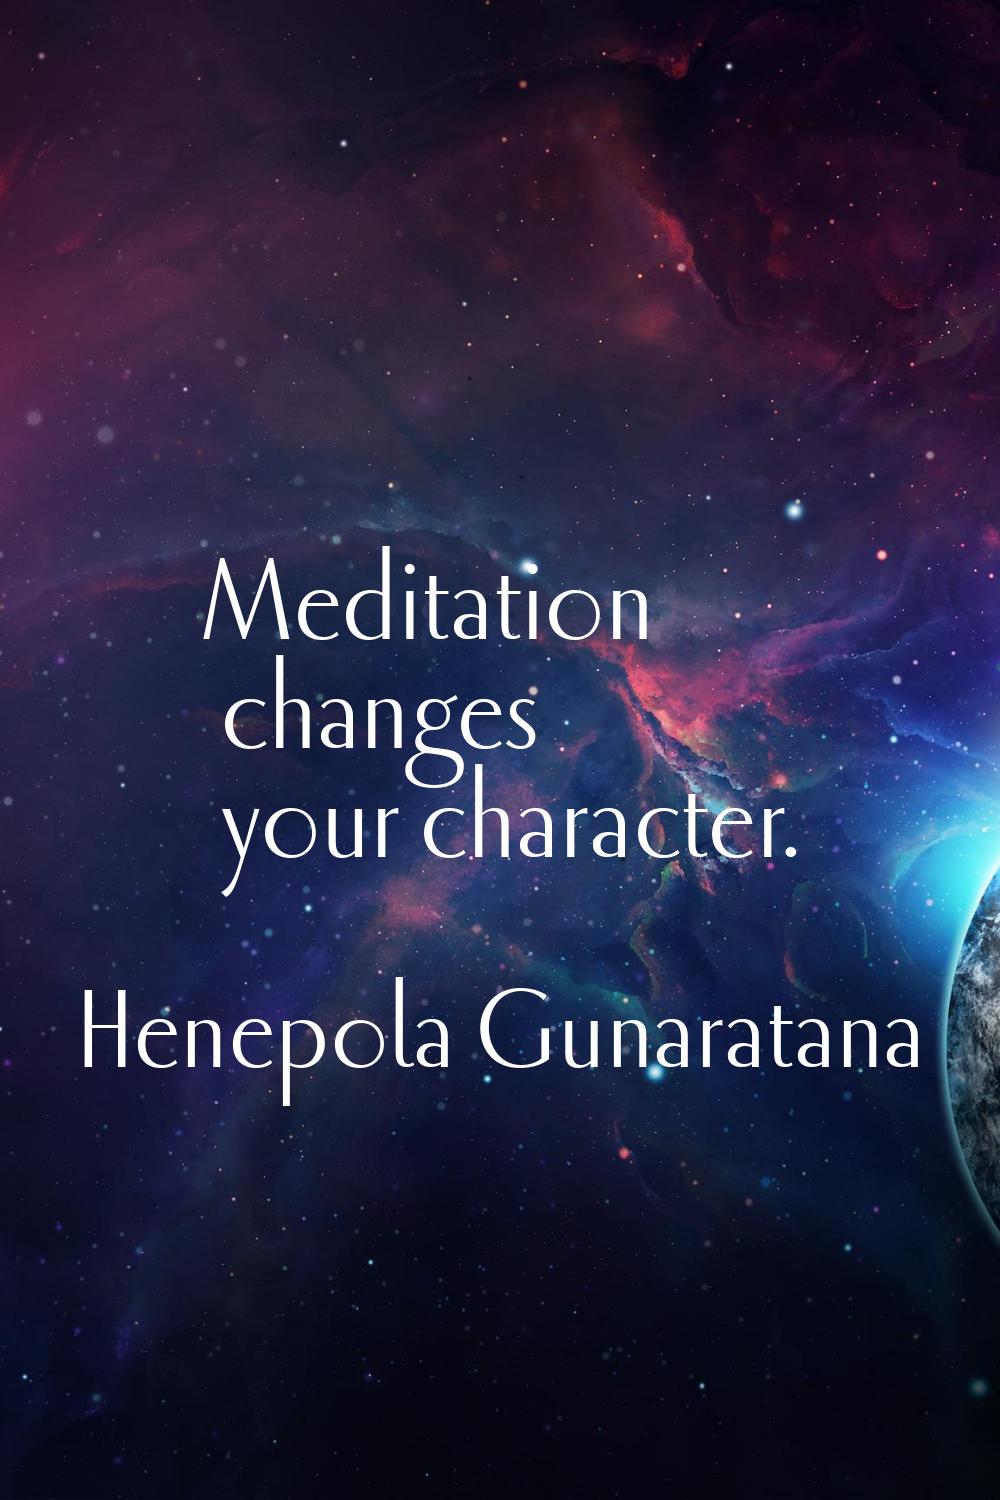 Meditation changes your character.